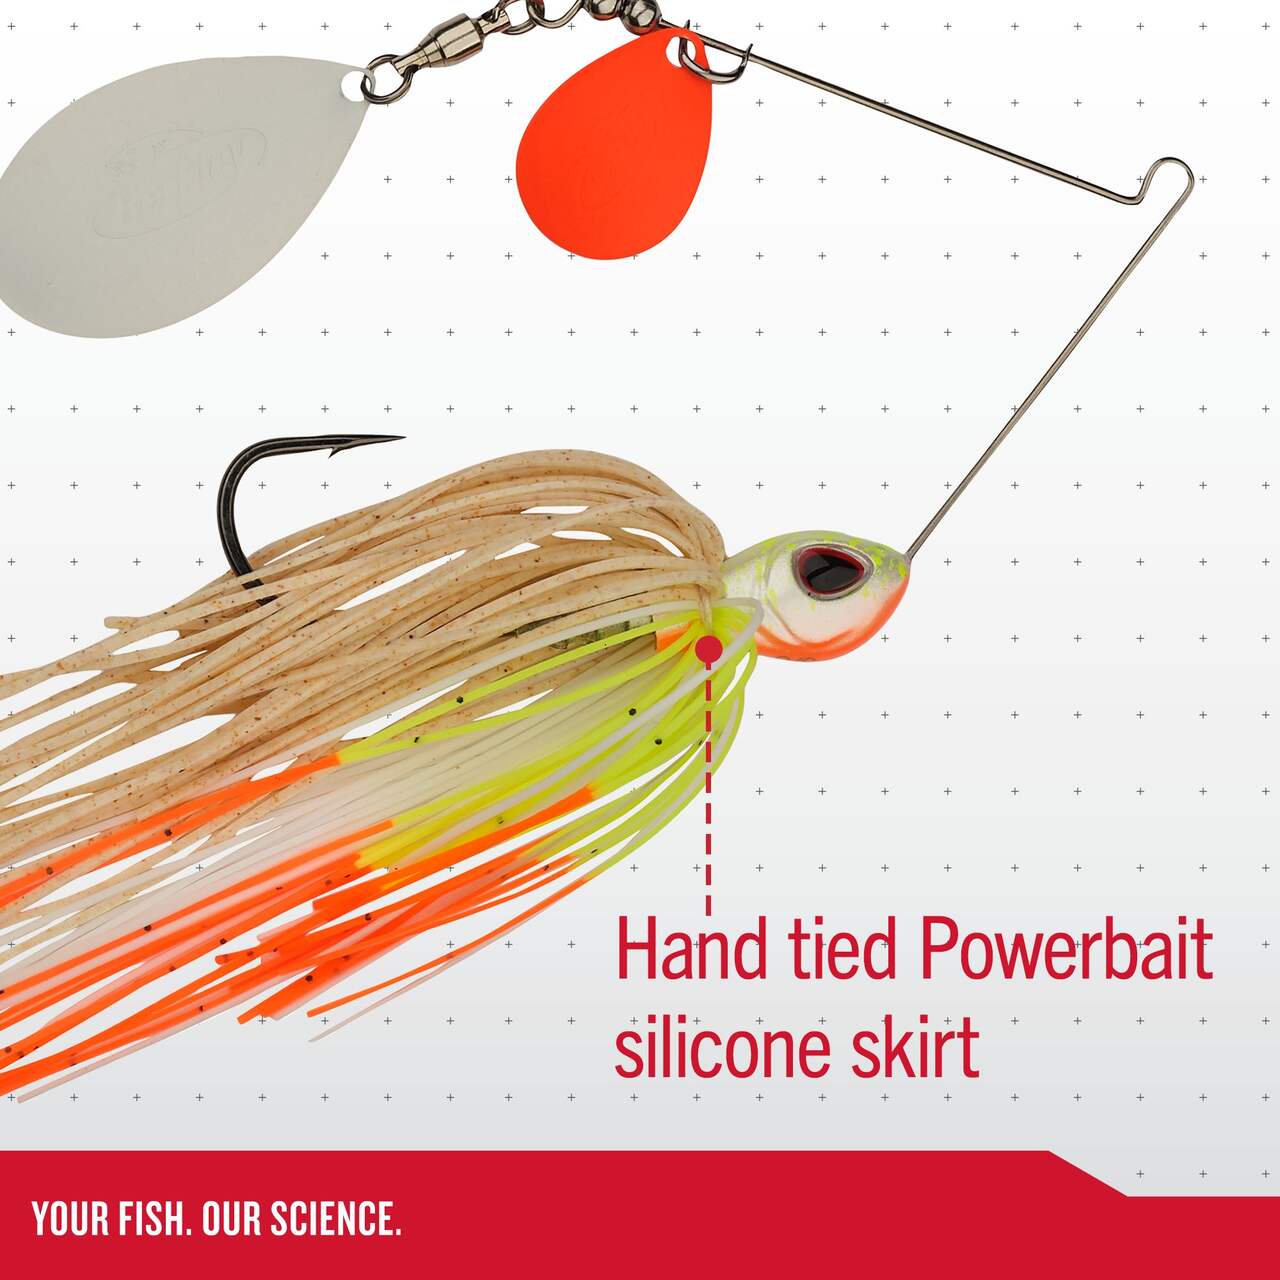 Berkley Power Blade Compact Spinnerbait Fishing Lure with Hand